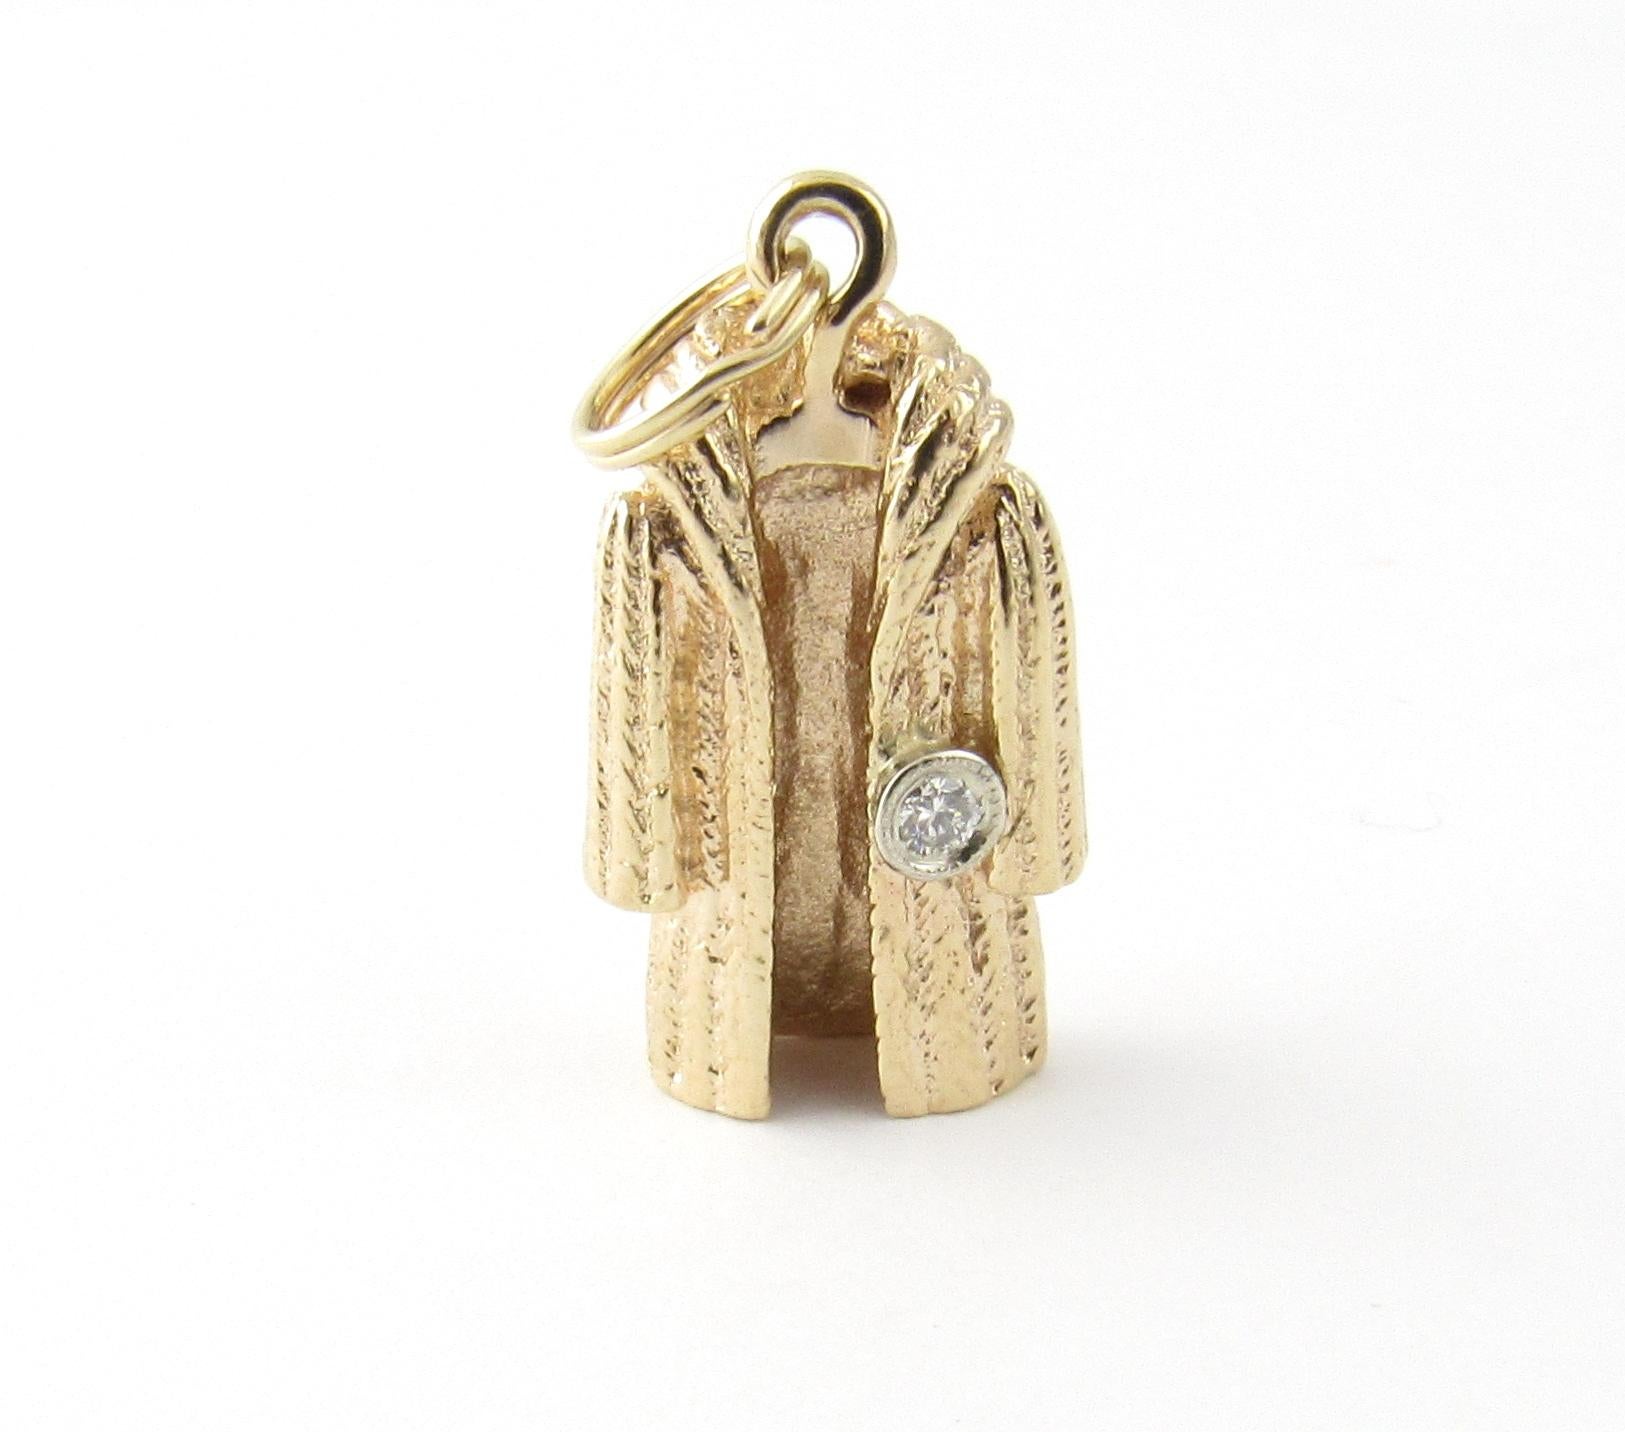 Vintage 14 Karat Yellow Gold and Diamond Mink Coat Charm

The ultimate luxury!

This lovely 3D charm features a miniature mink coat accented with one round brilliant cut diamond set in beautifully detailed 14K yellow gold.

Approximate total diamond